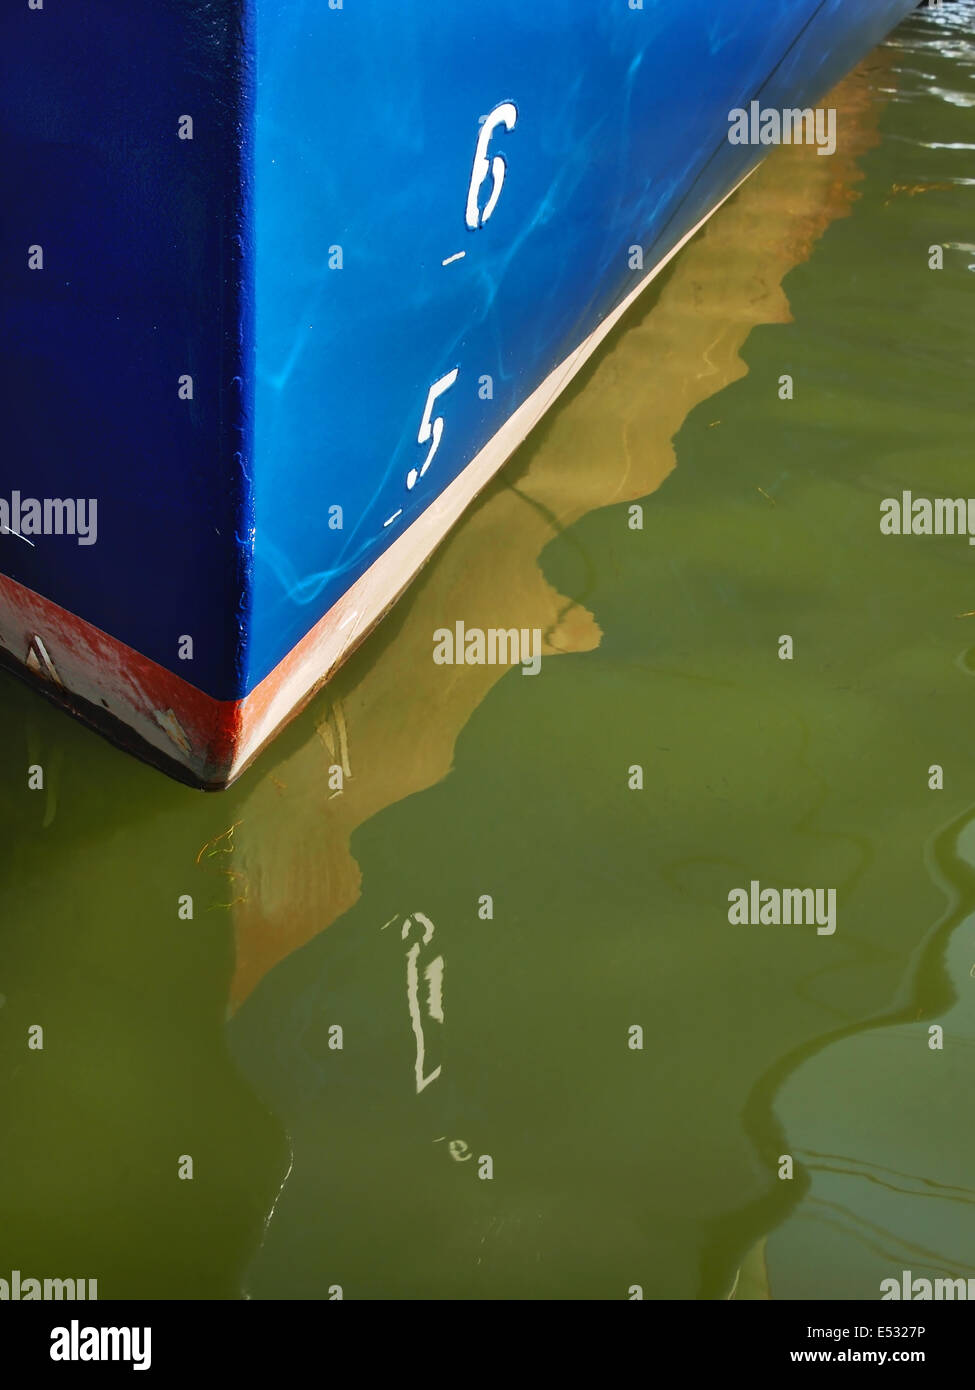 A bright blue boat hull with the numbers 6 and 5, and it's reflection on the surrounding water. Stock Photo